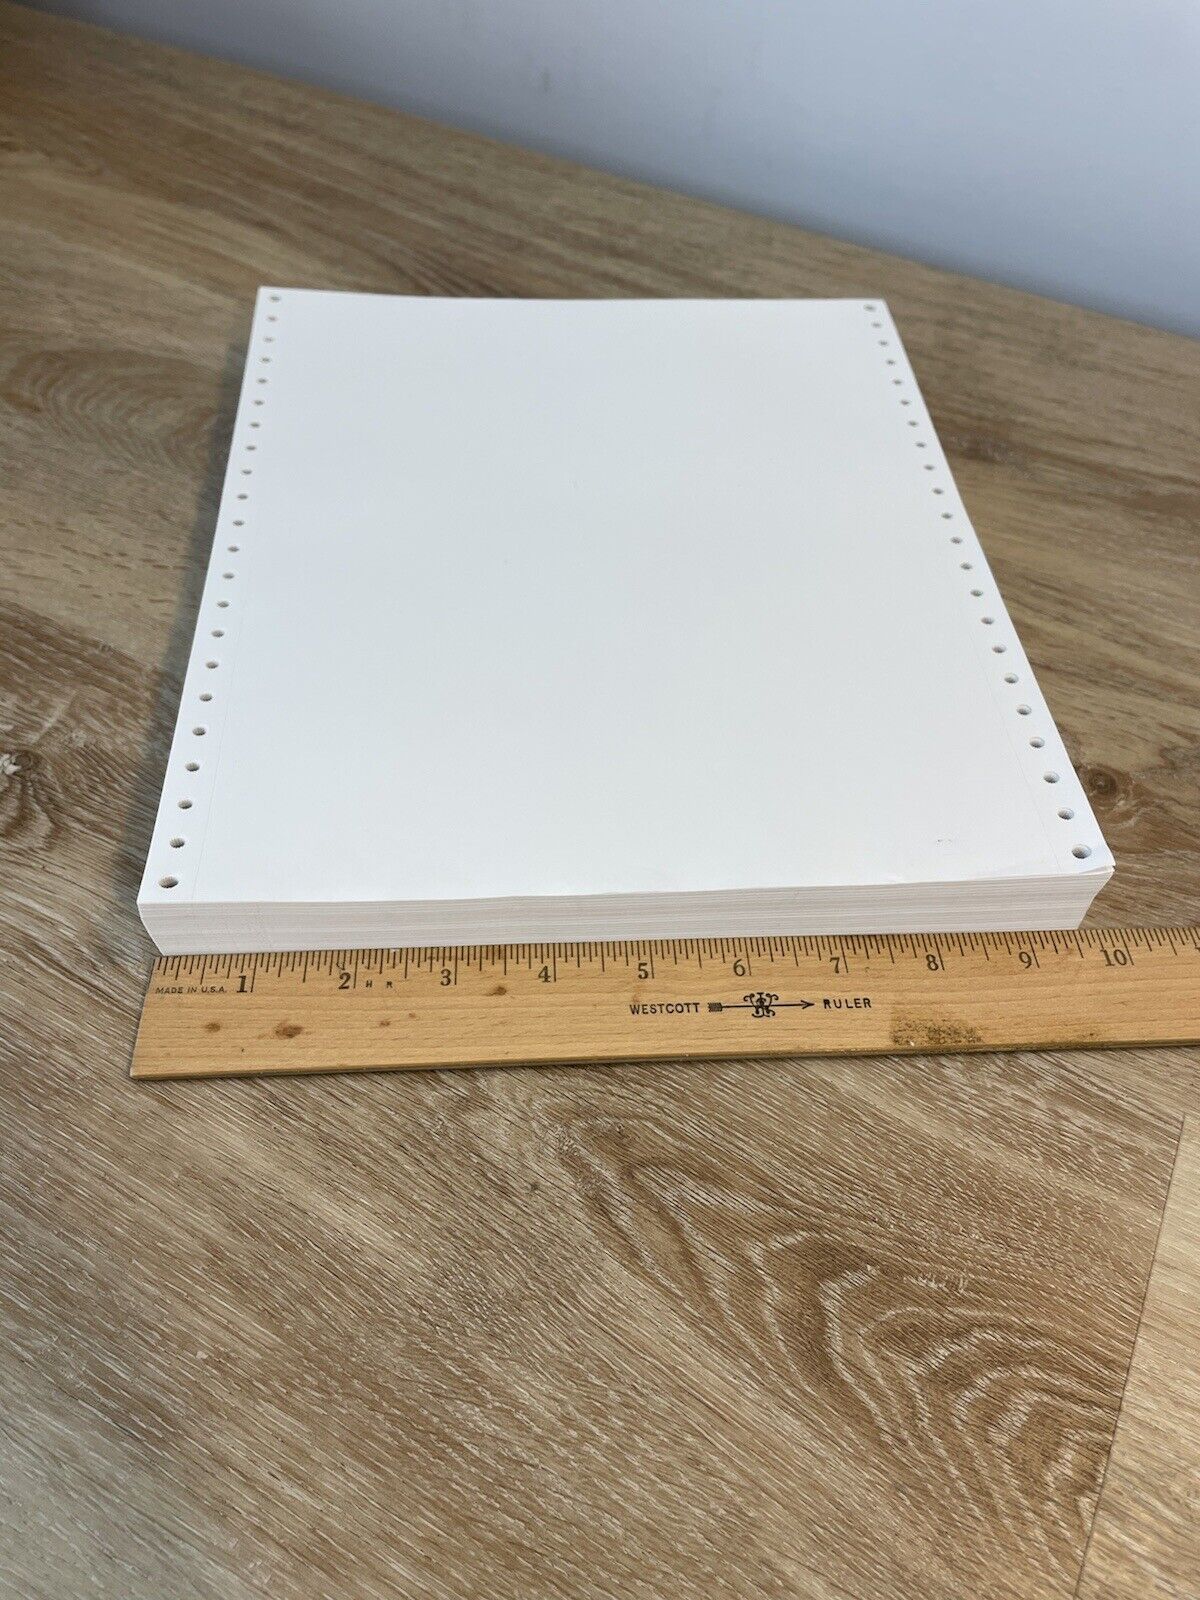 Vintage Dot Matrix Printer continuous Feed Paper 8.5 x 11 Approx 250 sheets